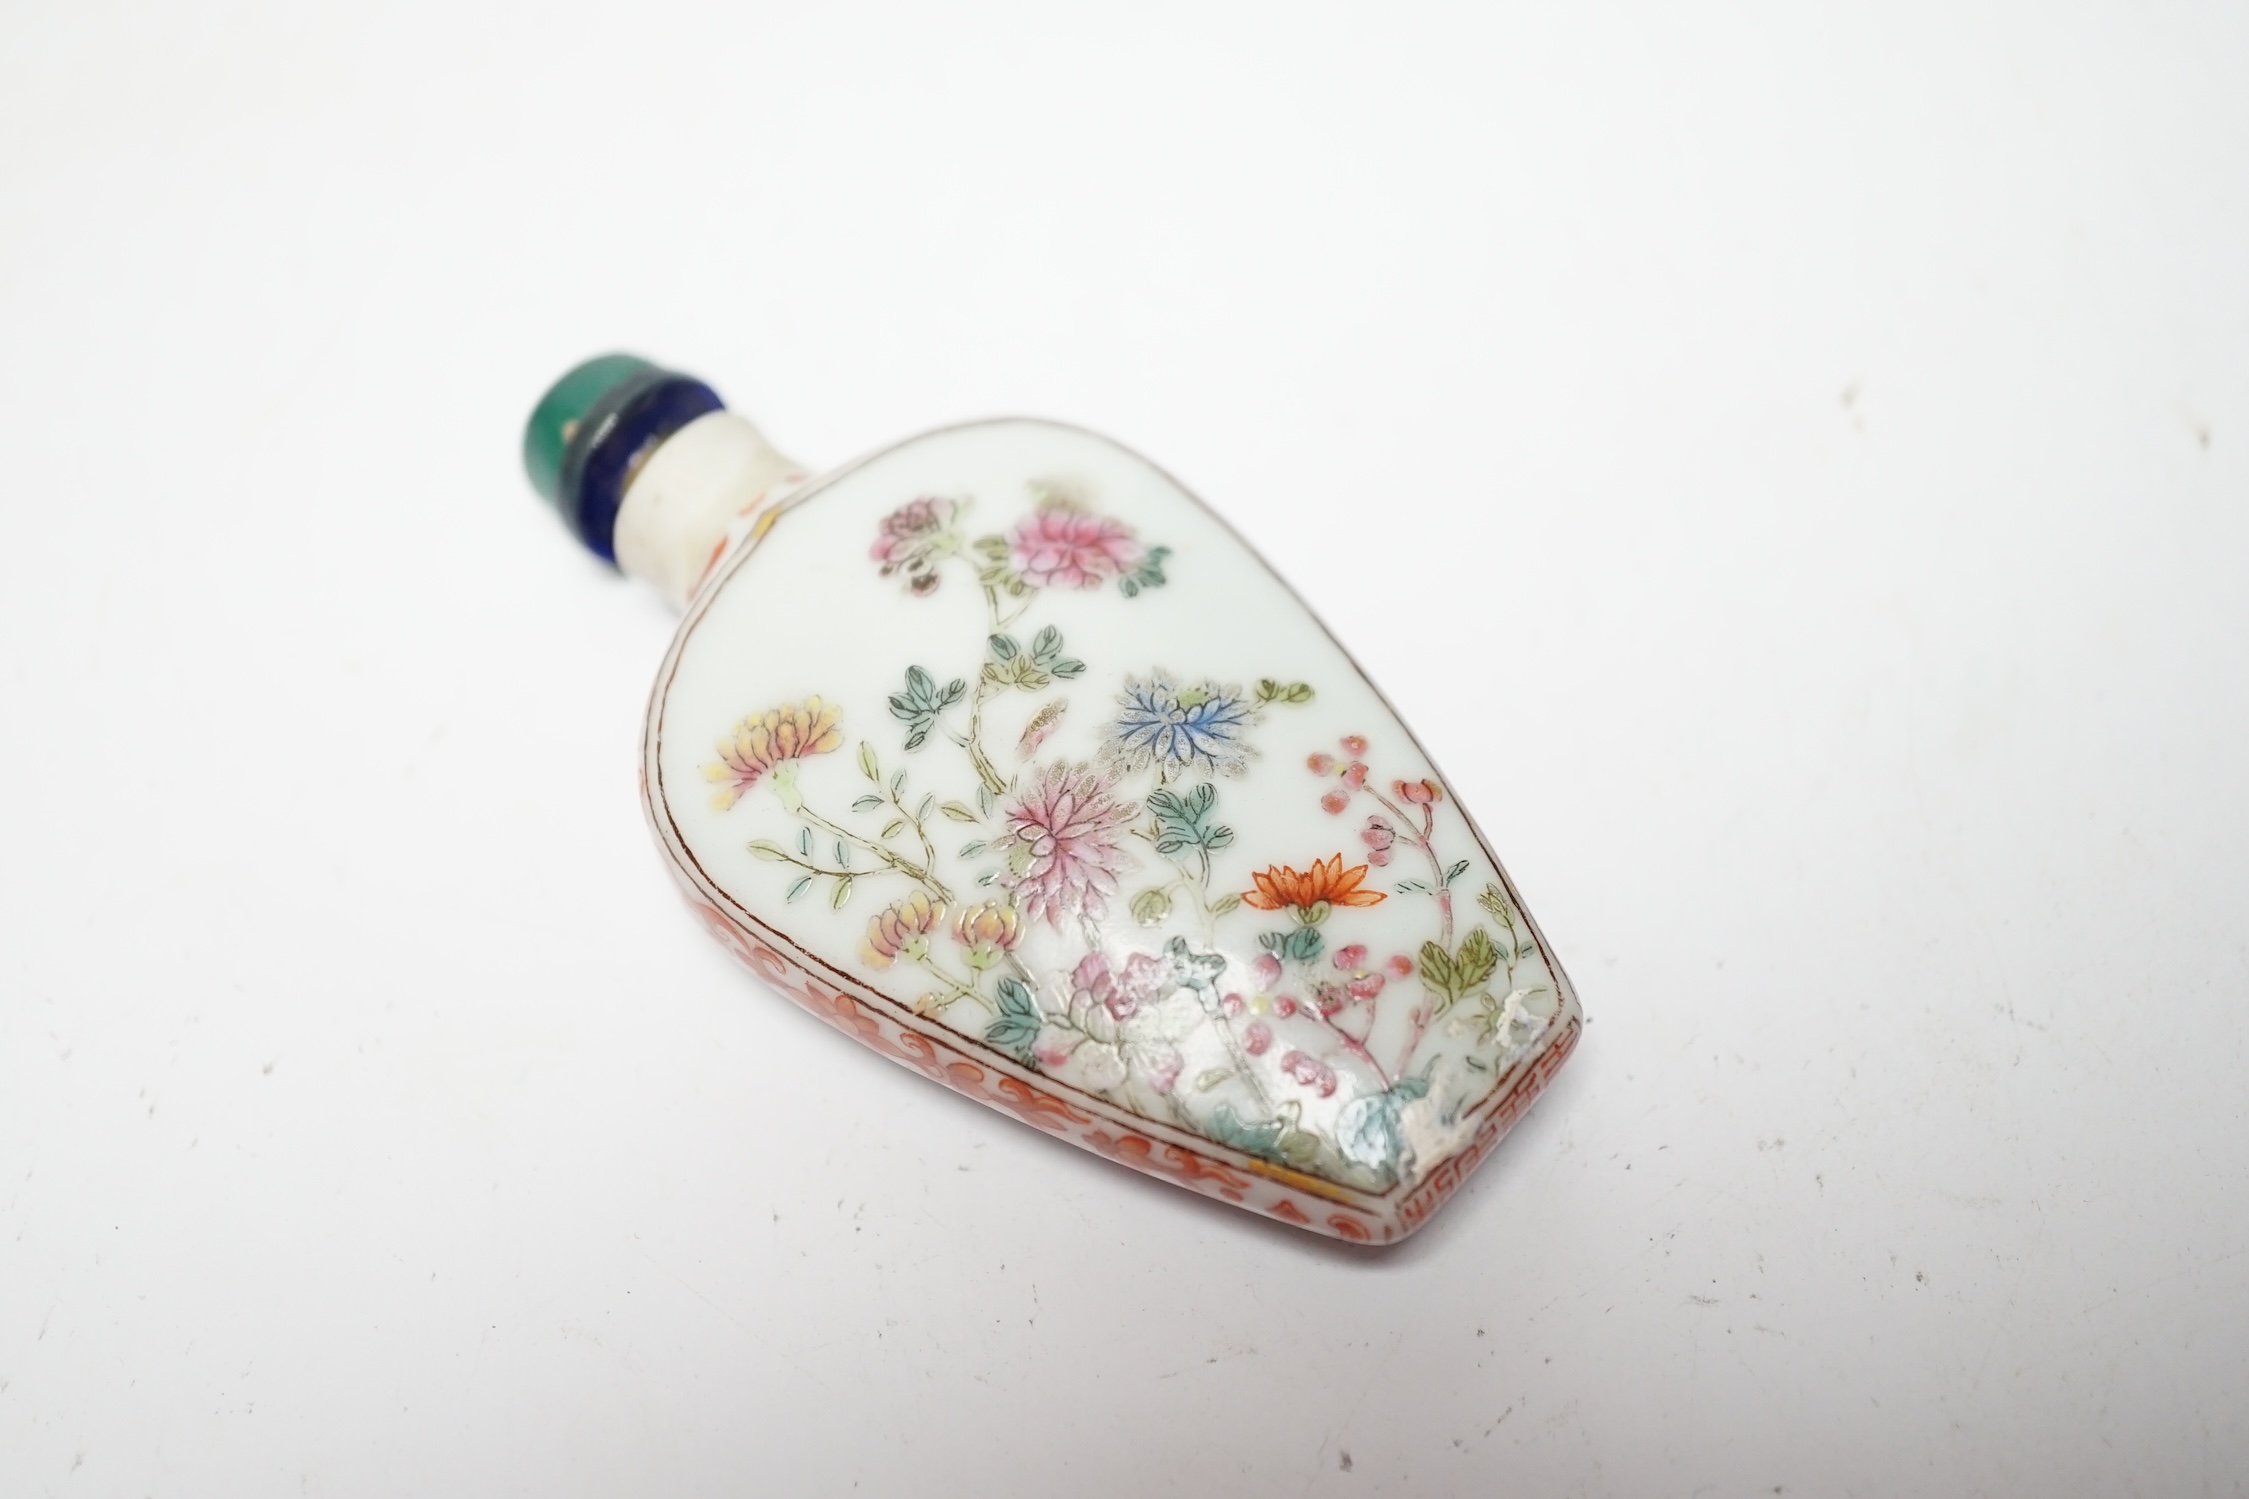 A Chinese famille rose snuff bottle, Jiaqing mark and of the period (1796-1820), rim ground off, 7cm high